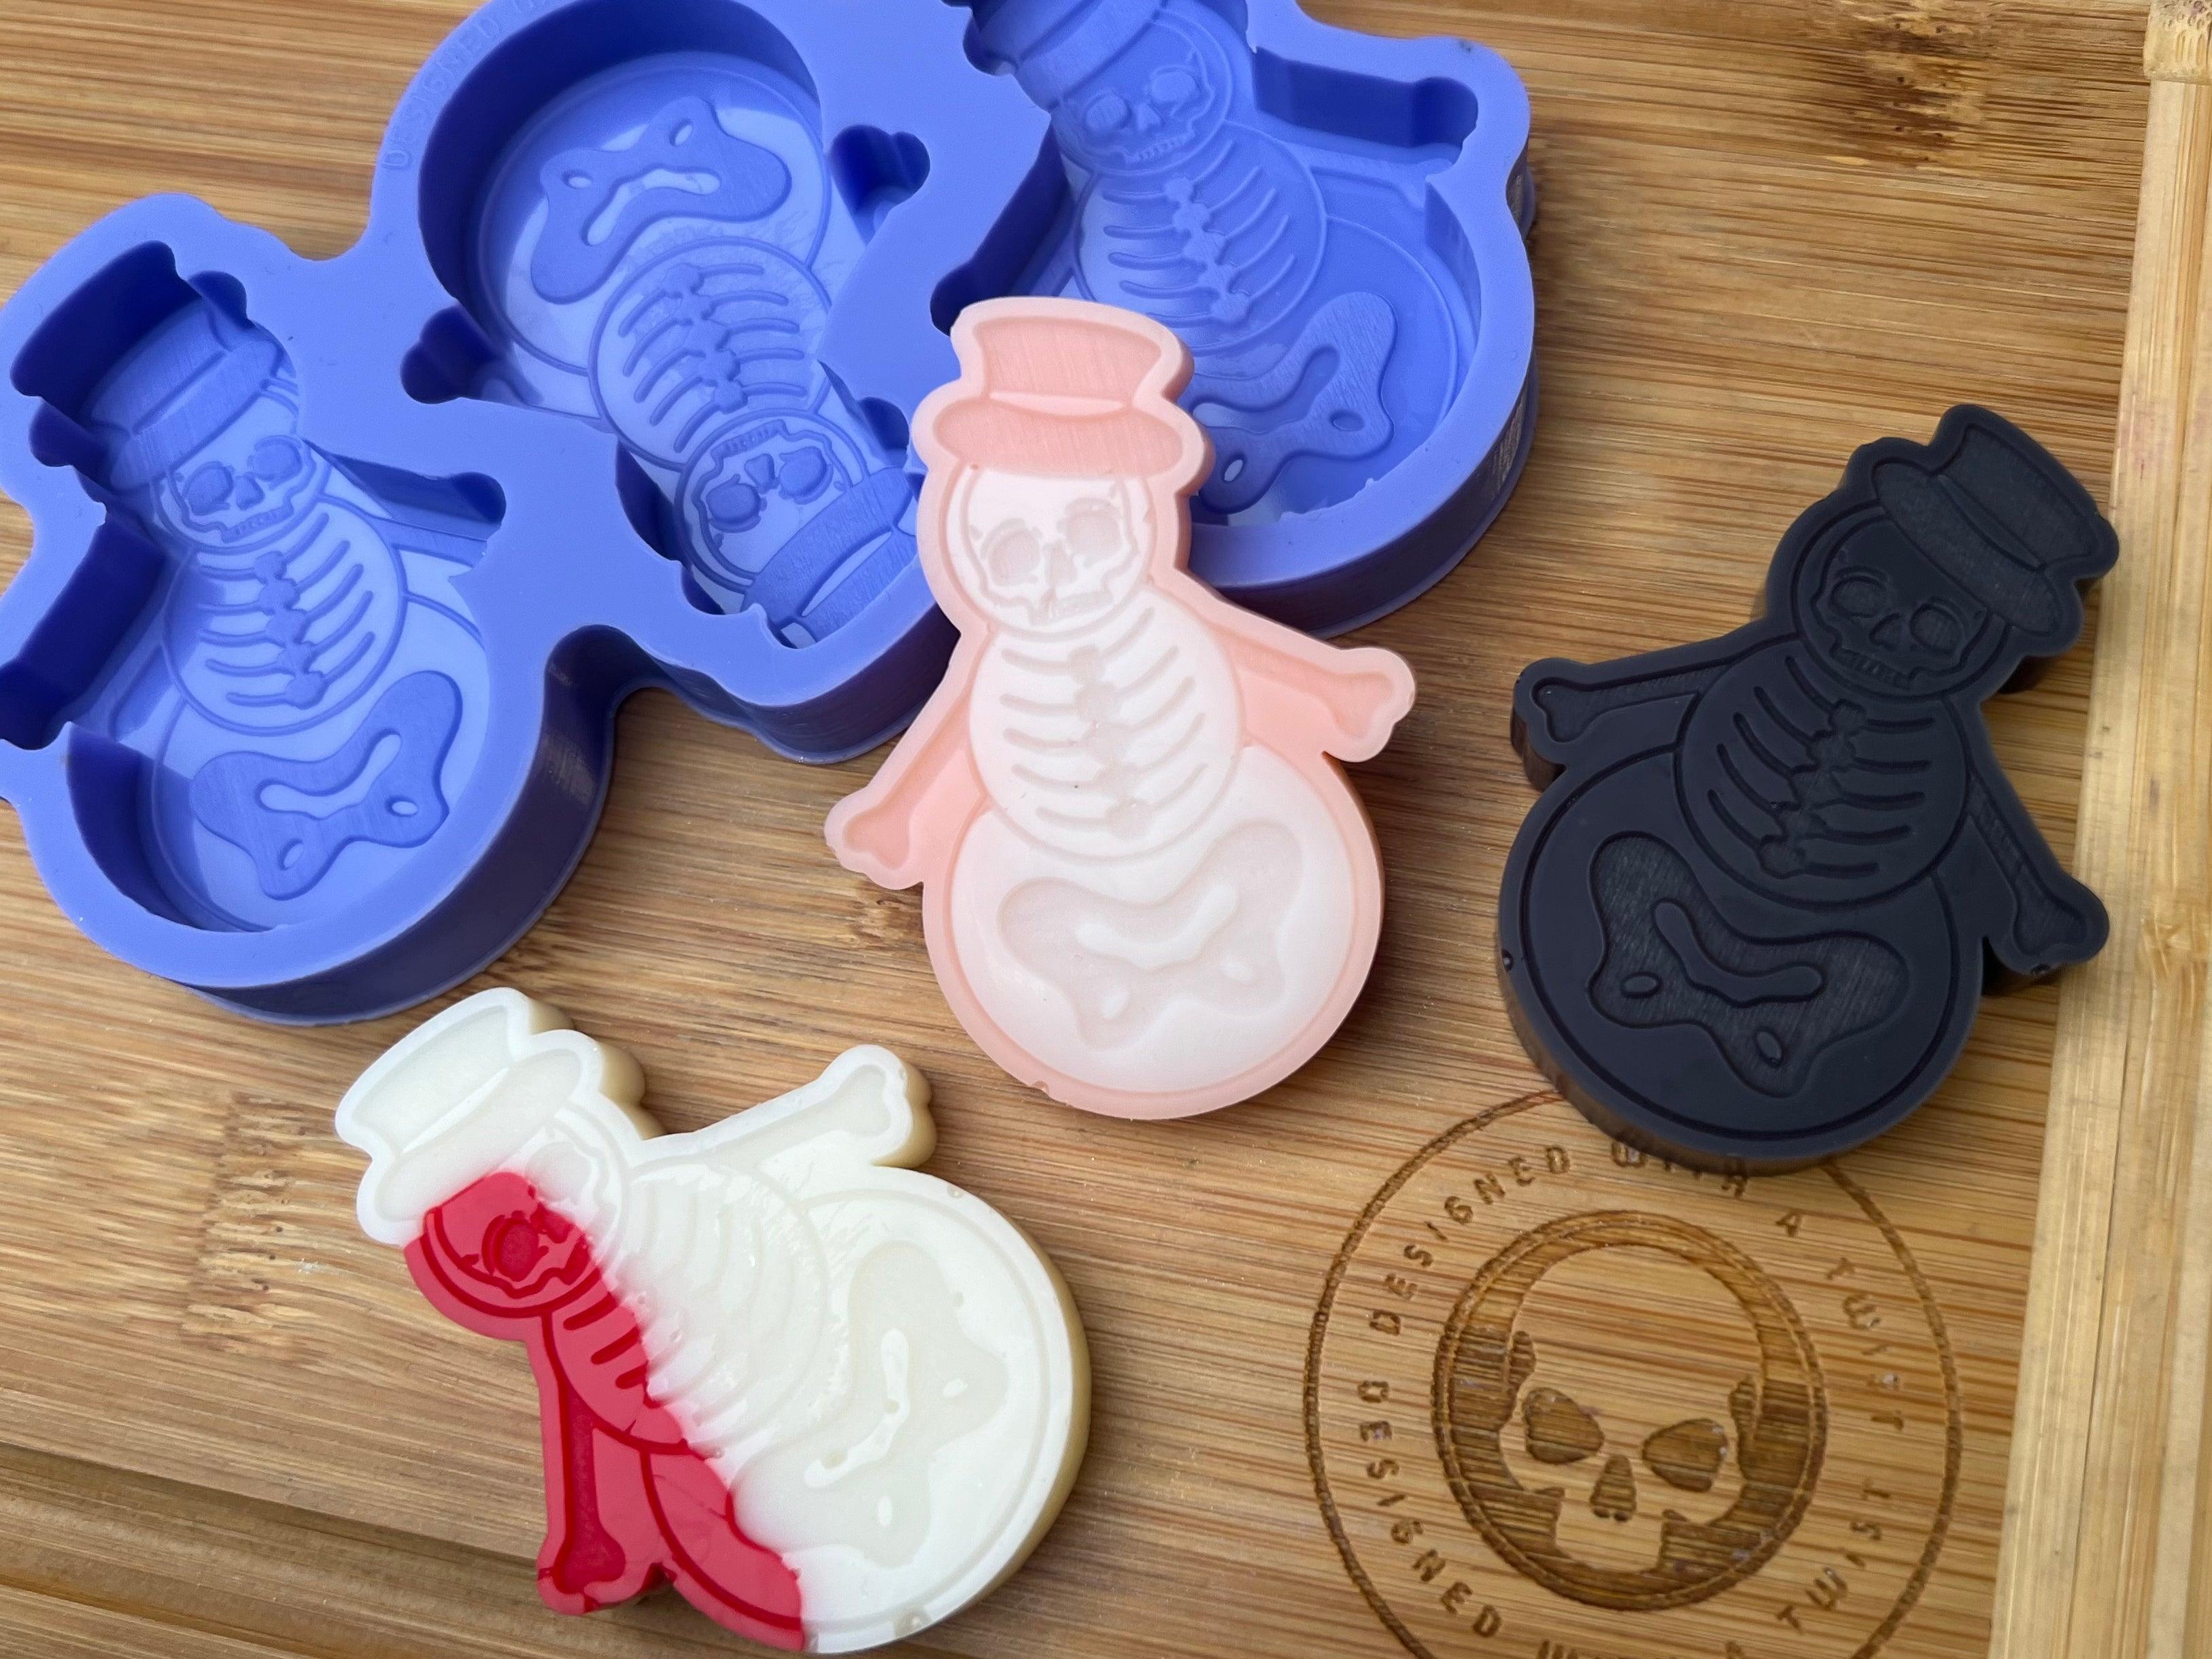 Skeleton Snowman Wax Melt Silicone Mold - Designed with a Twist - Top quality silicone molds made in the UK.